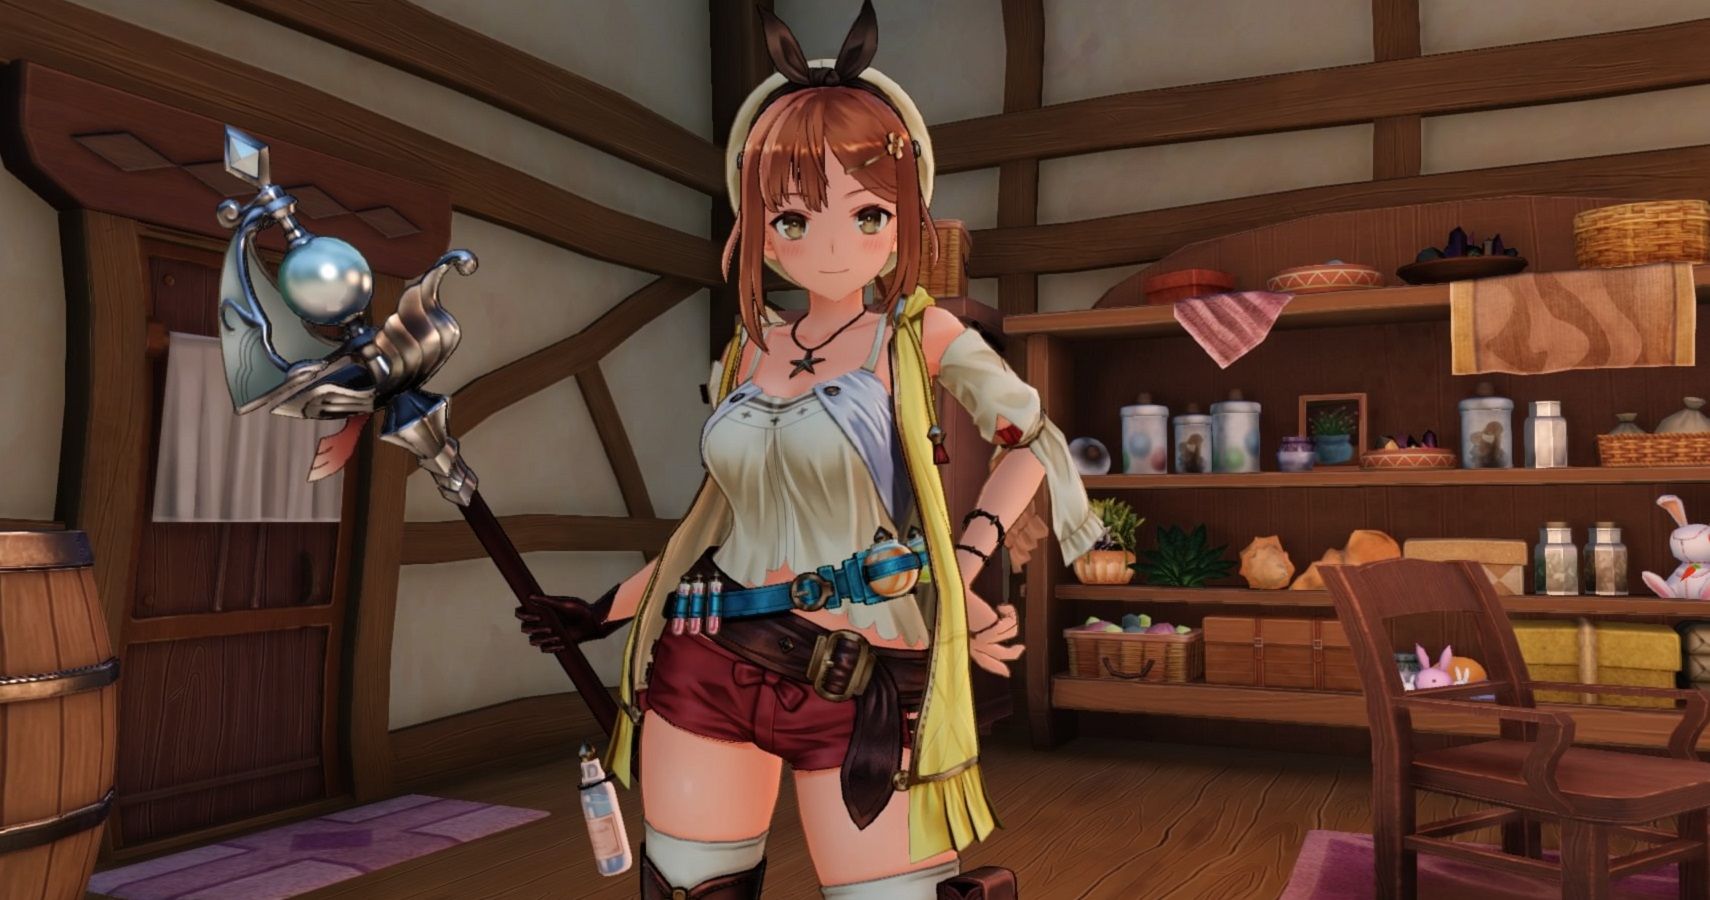 Atelier Ryza To Receive An Official Manga Adaptation